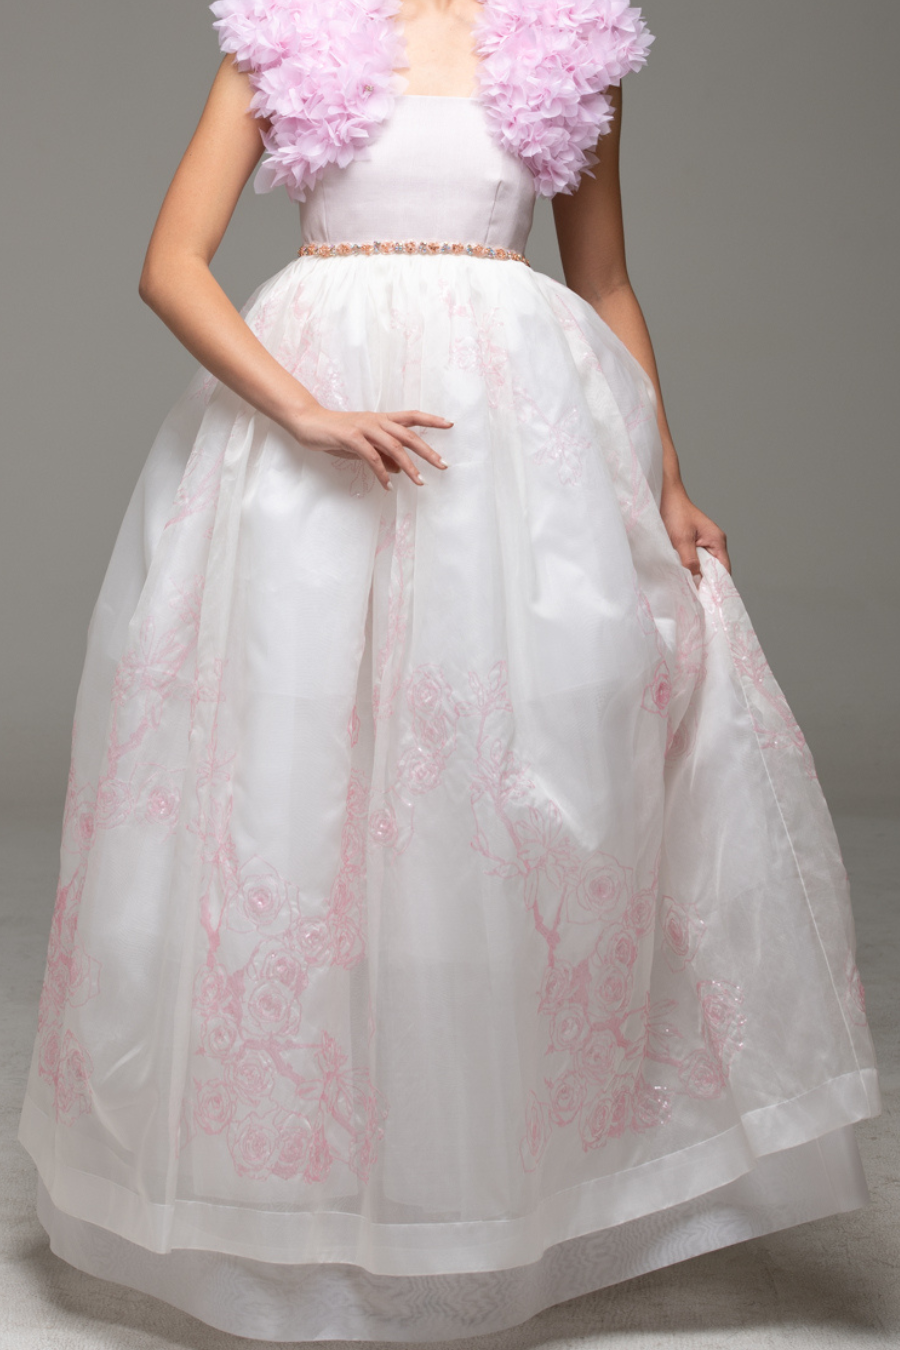 White dress with pink beading (without bolero top)